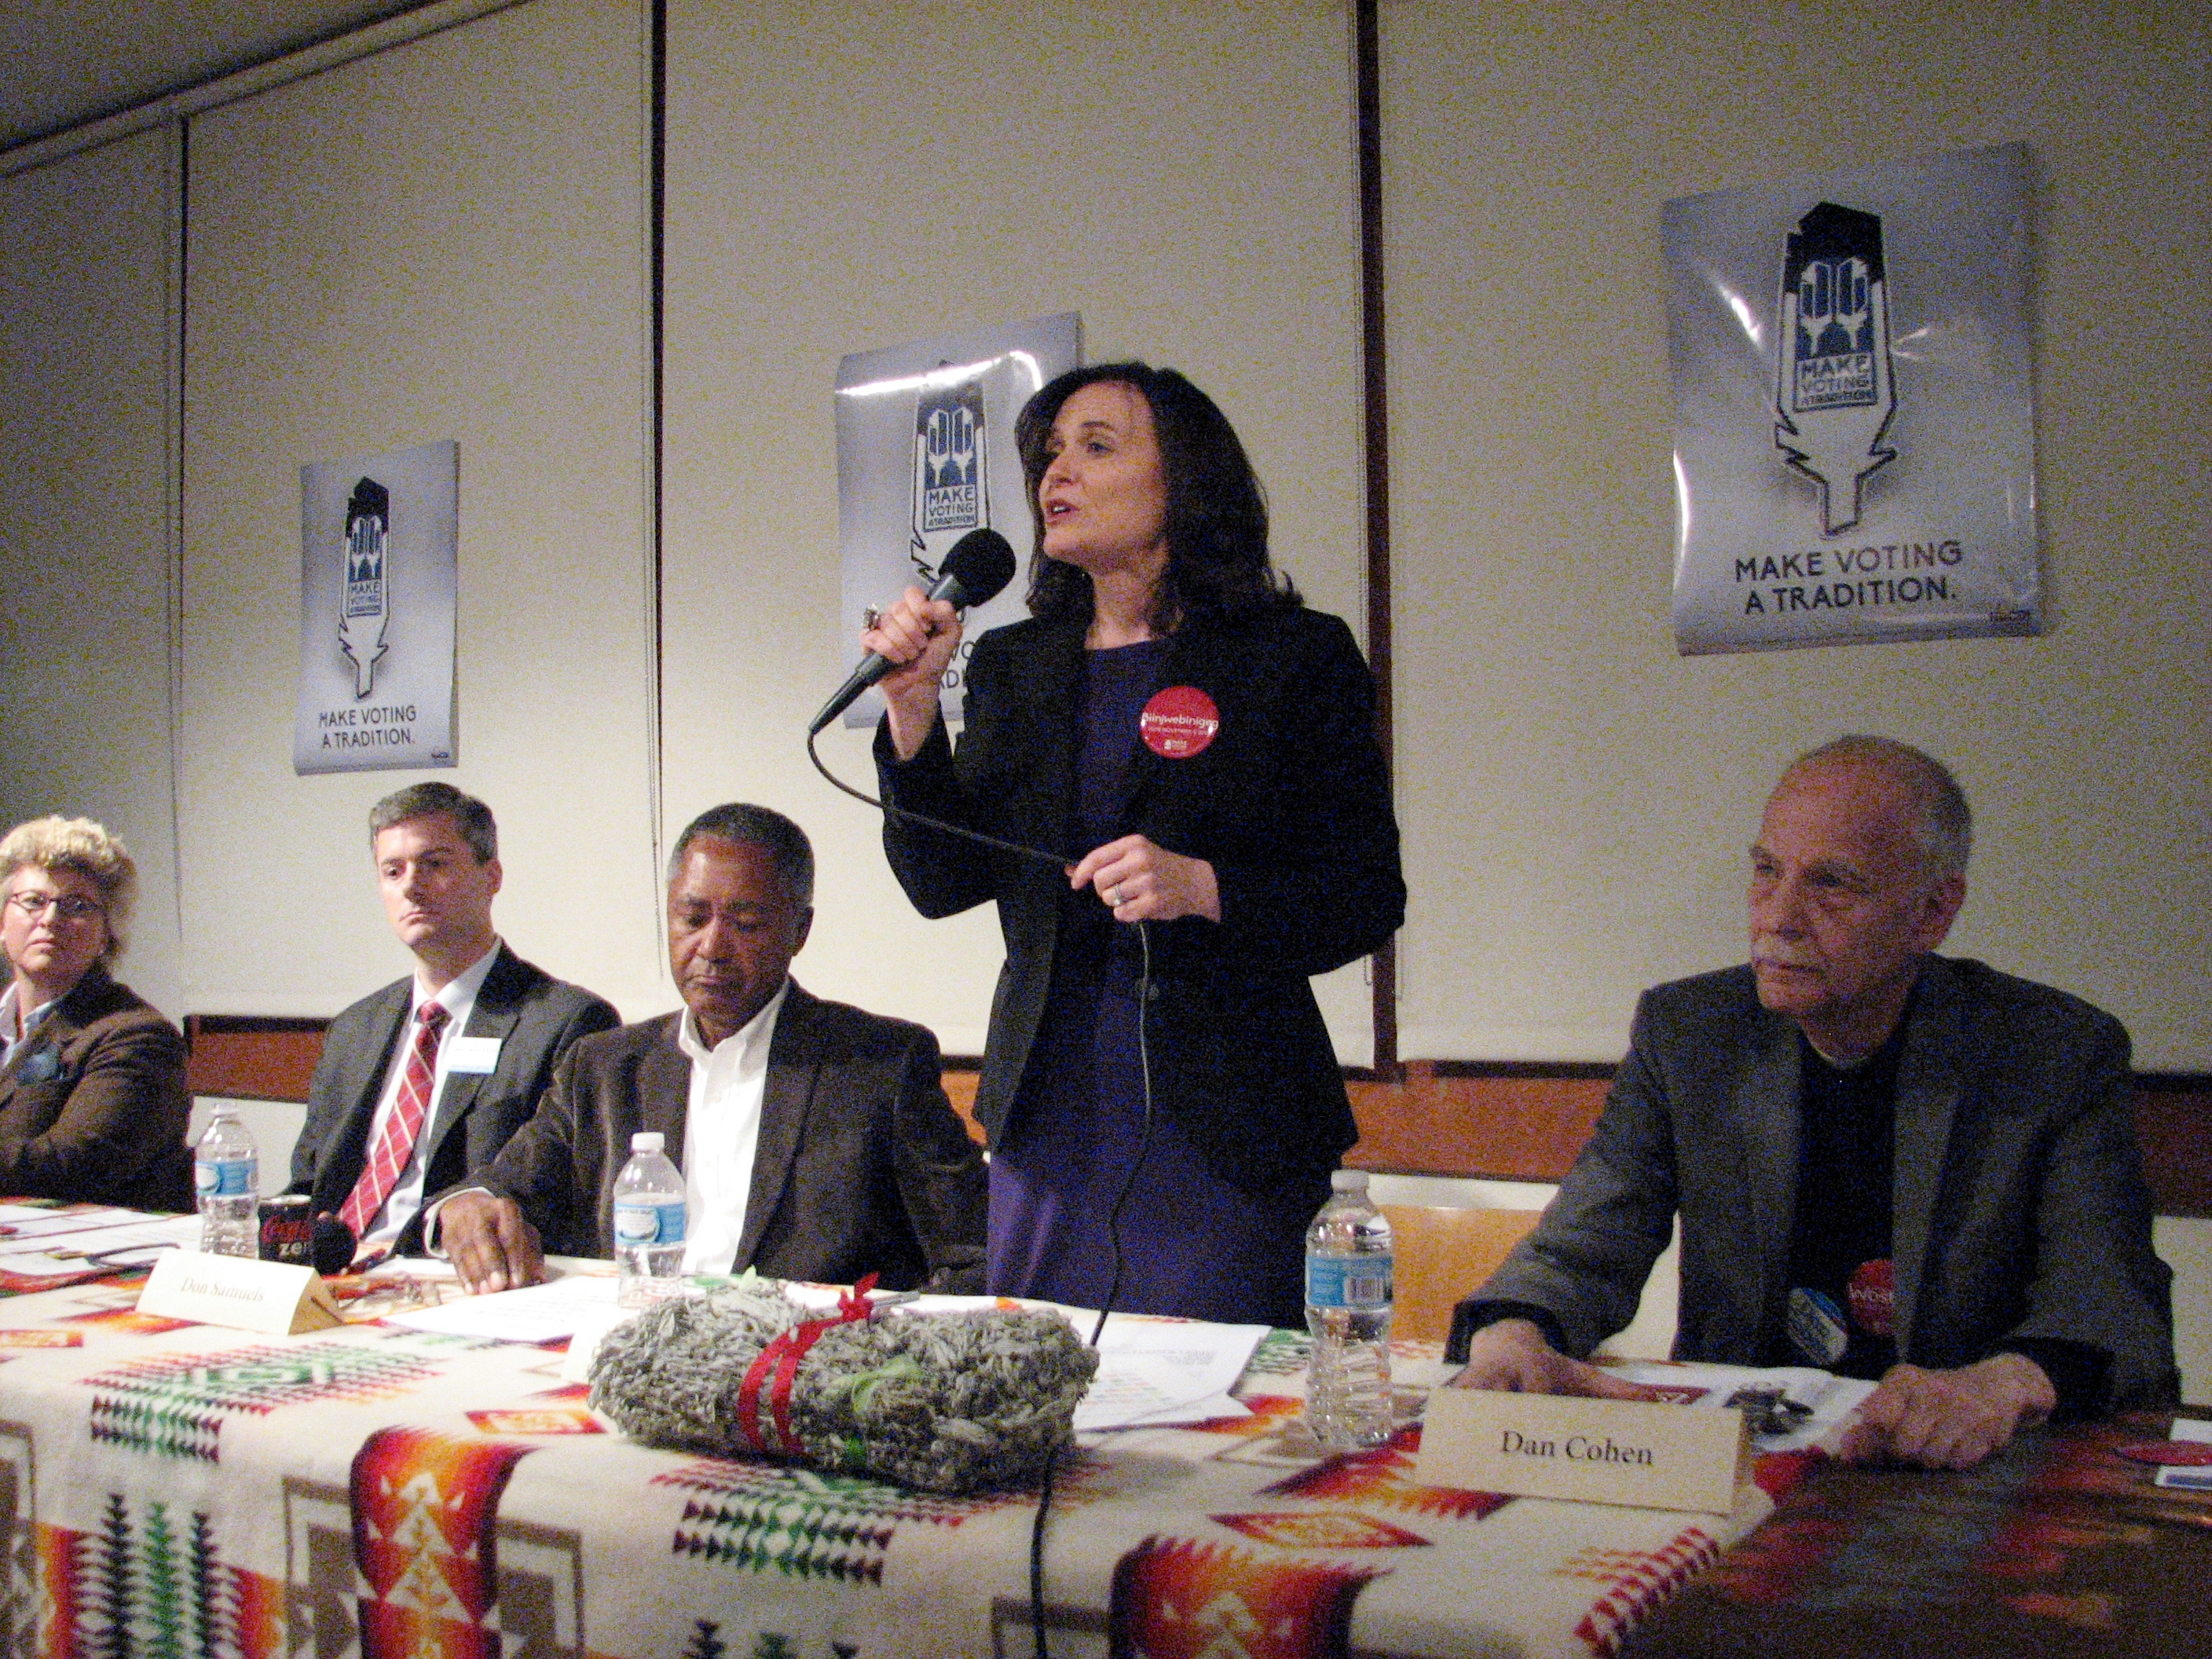 mpls mayoral candidates address native issues.jpg